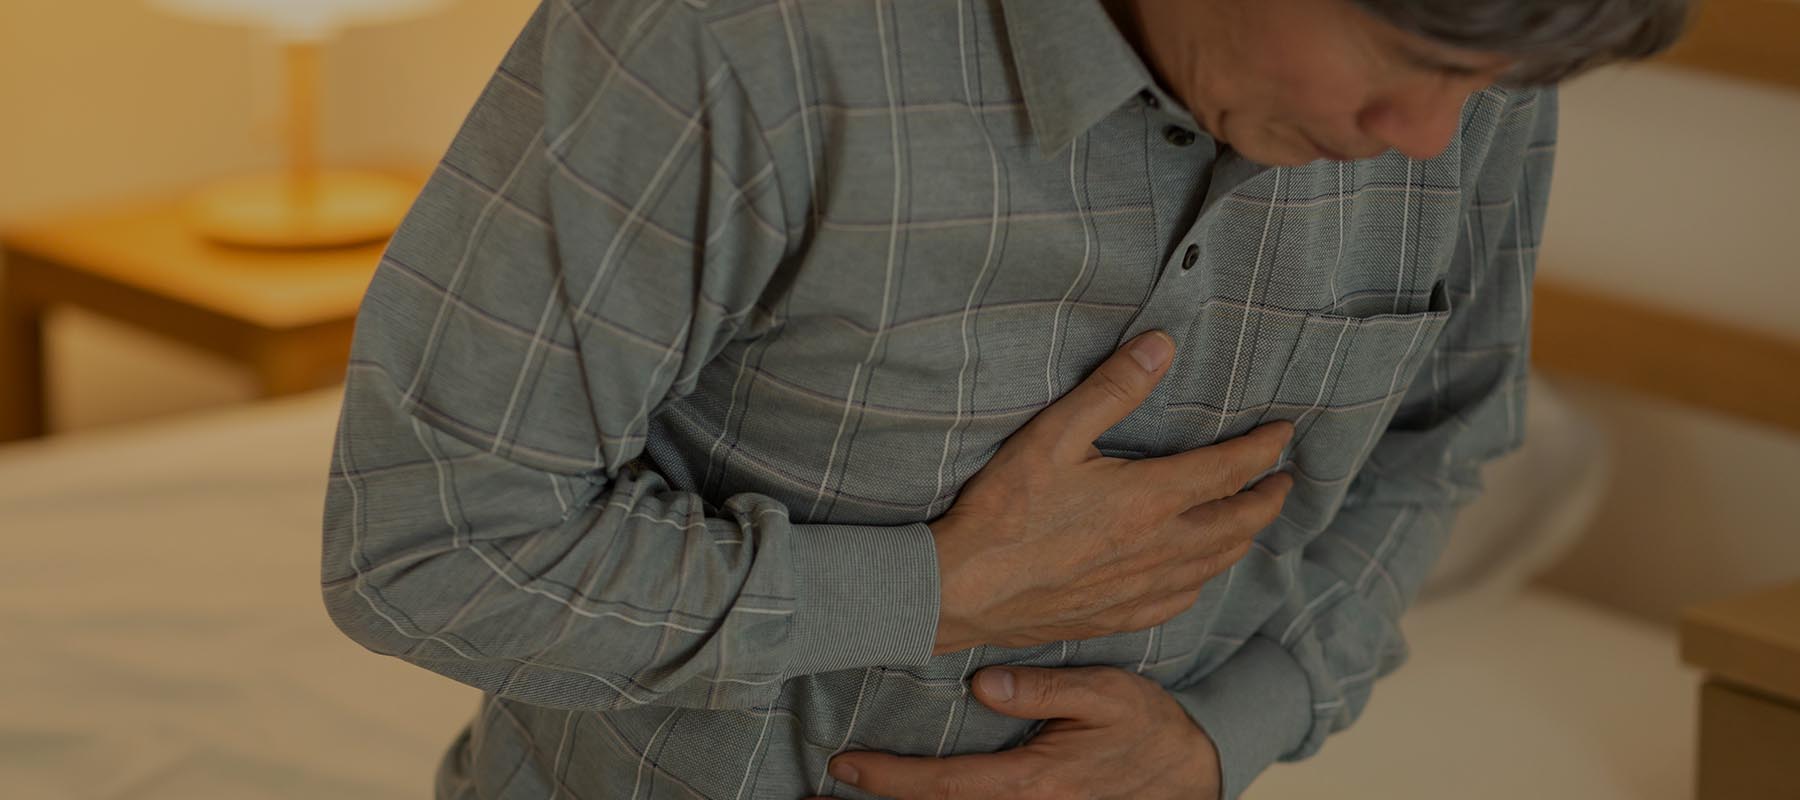 Chest Pain While Sleeping? Causes and How to Fix the Issue